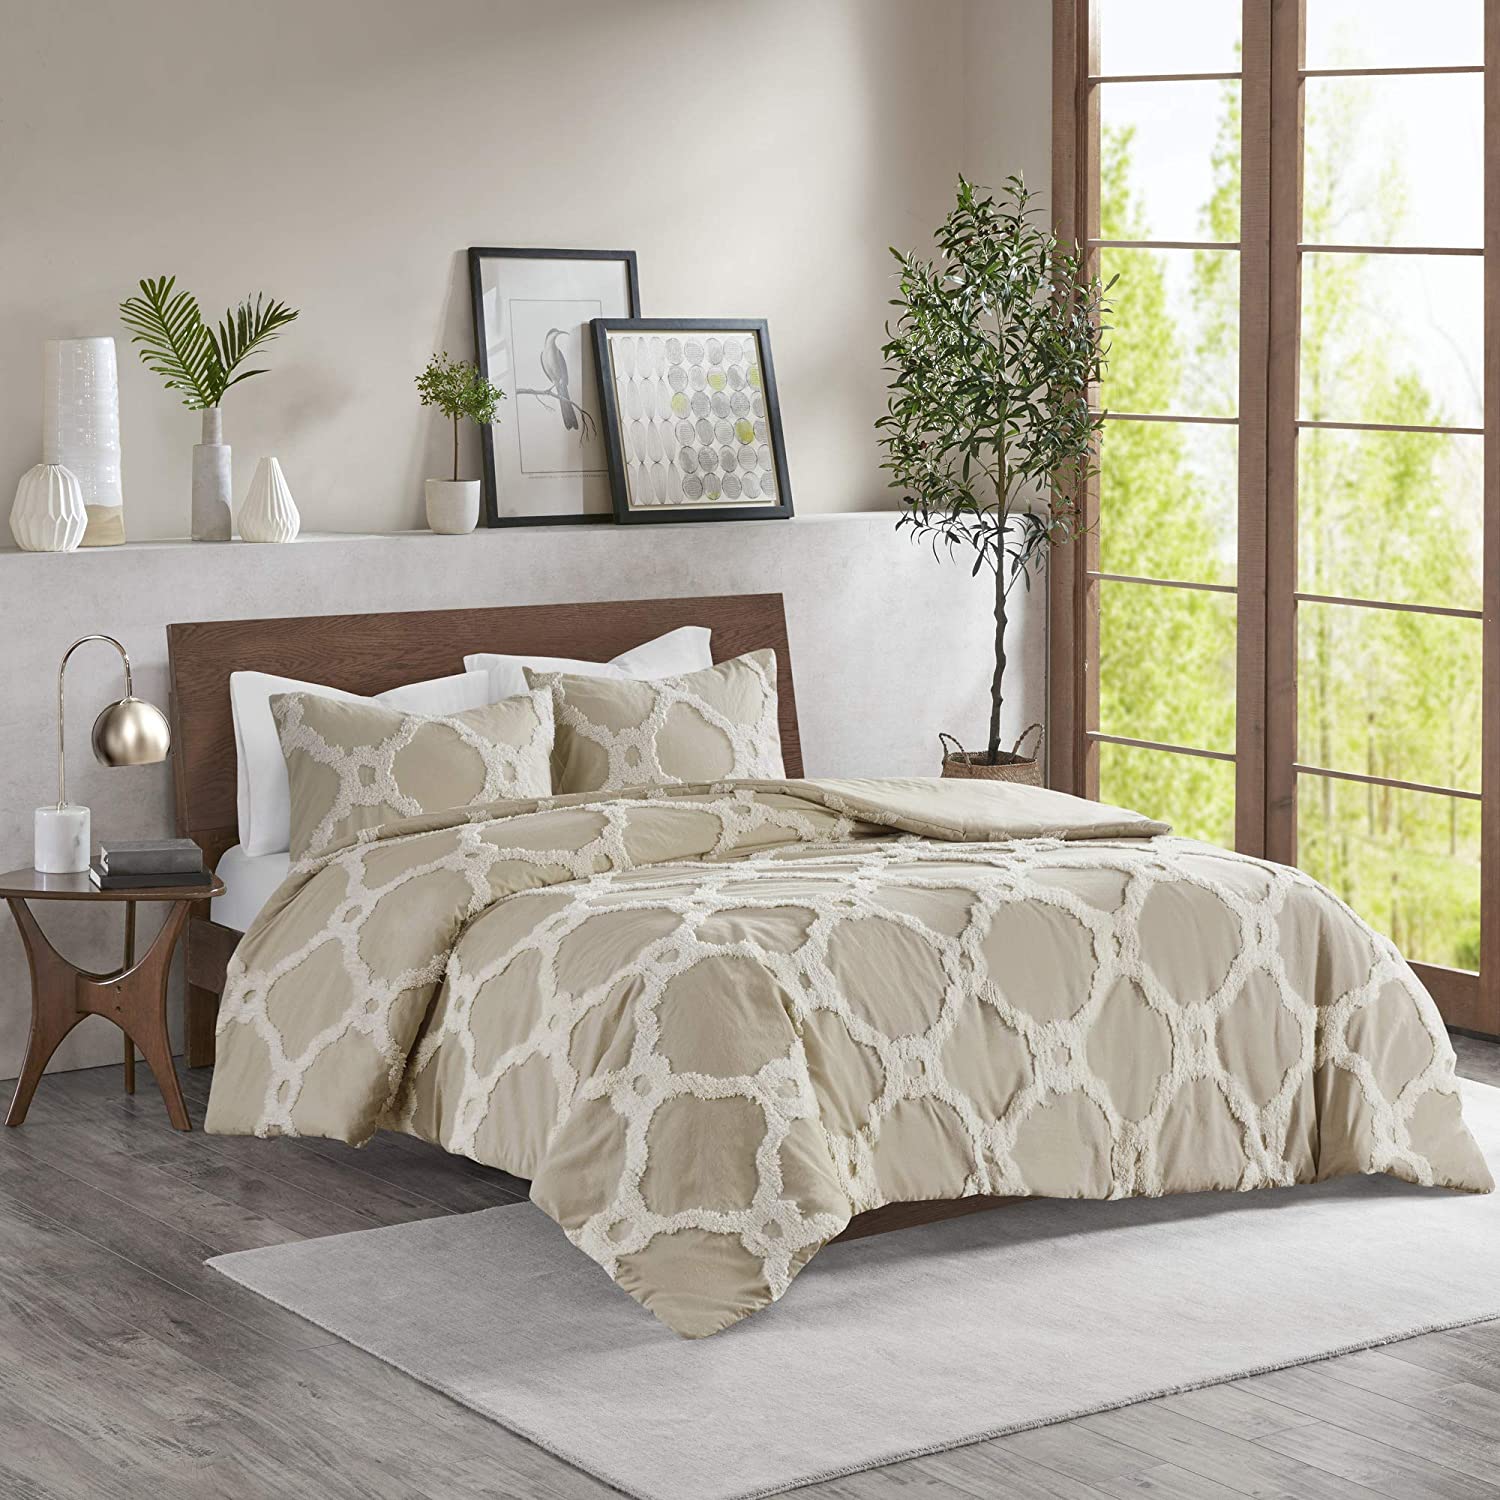 Price:$40.99  Park Tufted Chenille 100% Cotton Duvet- Modern Luxe All Season Comforter Cover Bed Set with Matching Shams, Pacey, Ogee Taupe Full/Queen(90"x90") 3 Piece : Home & Kitchen